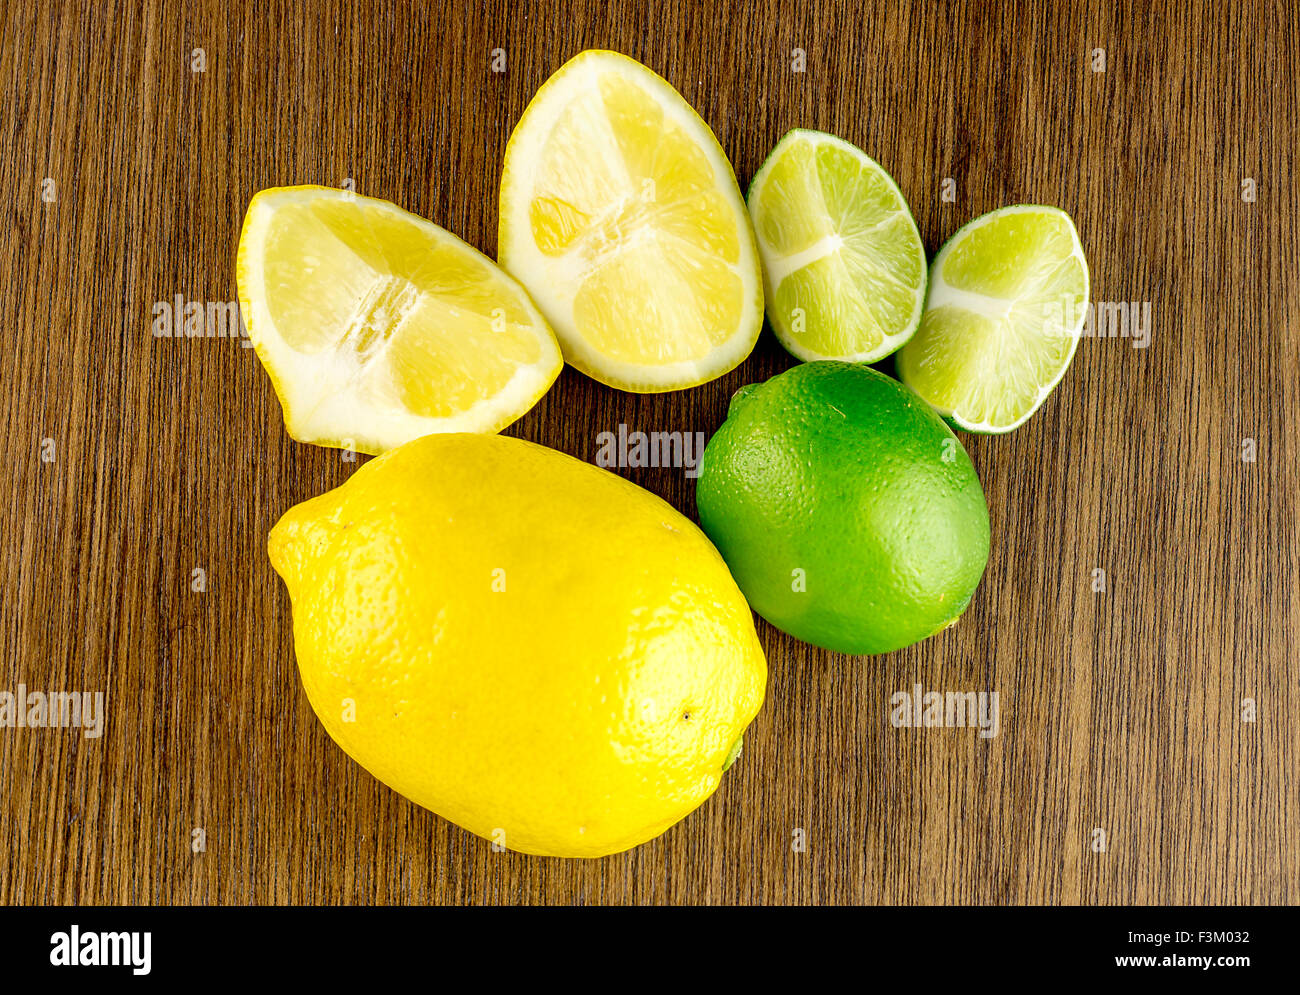 Overhead shot of vibrant ripe green limes and yellow lemons, cut and whole Stock Photo